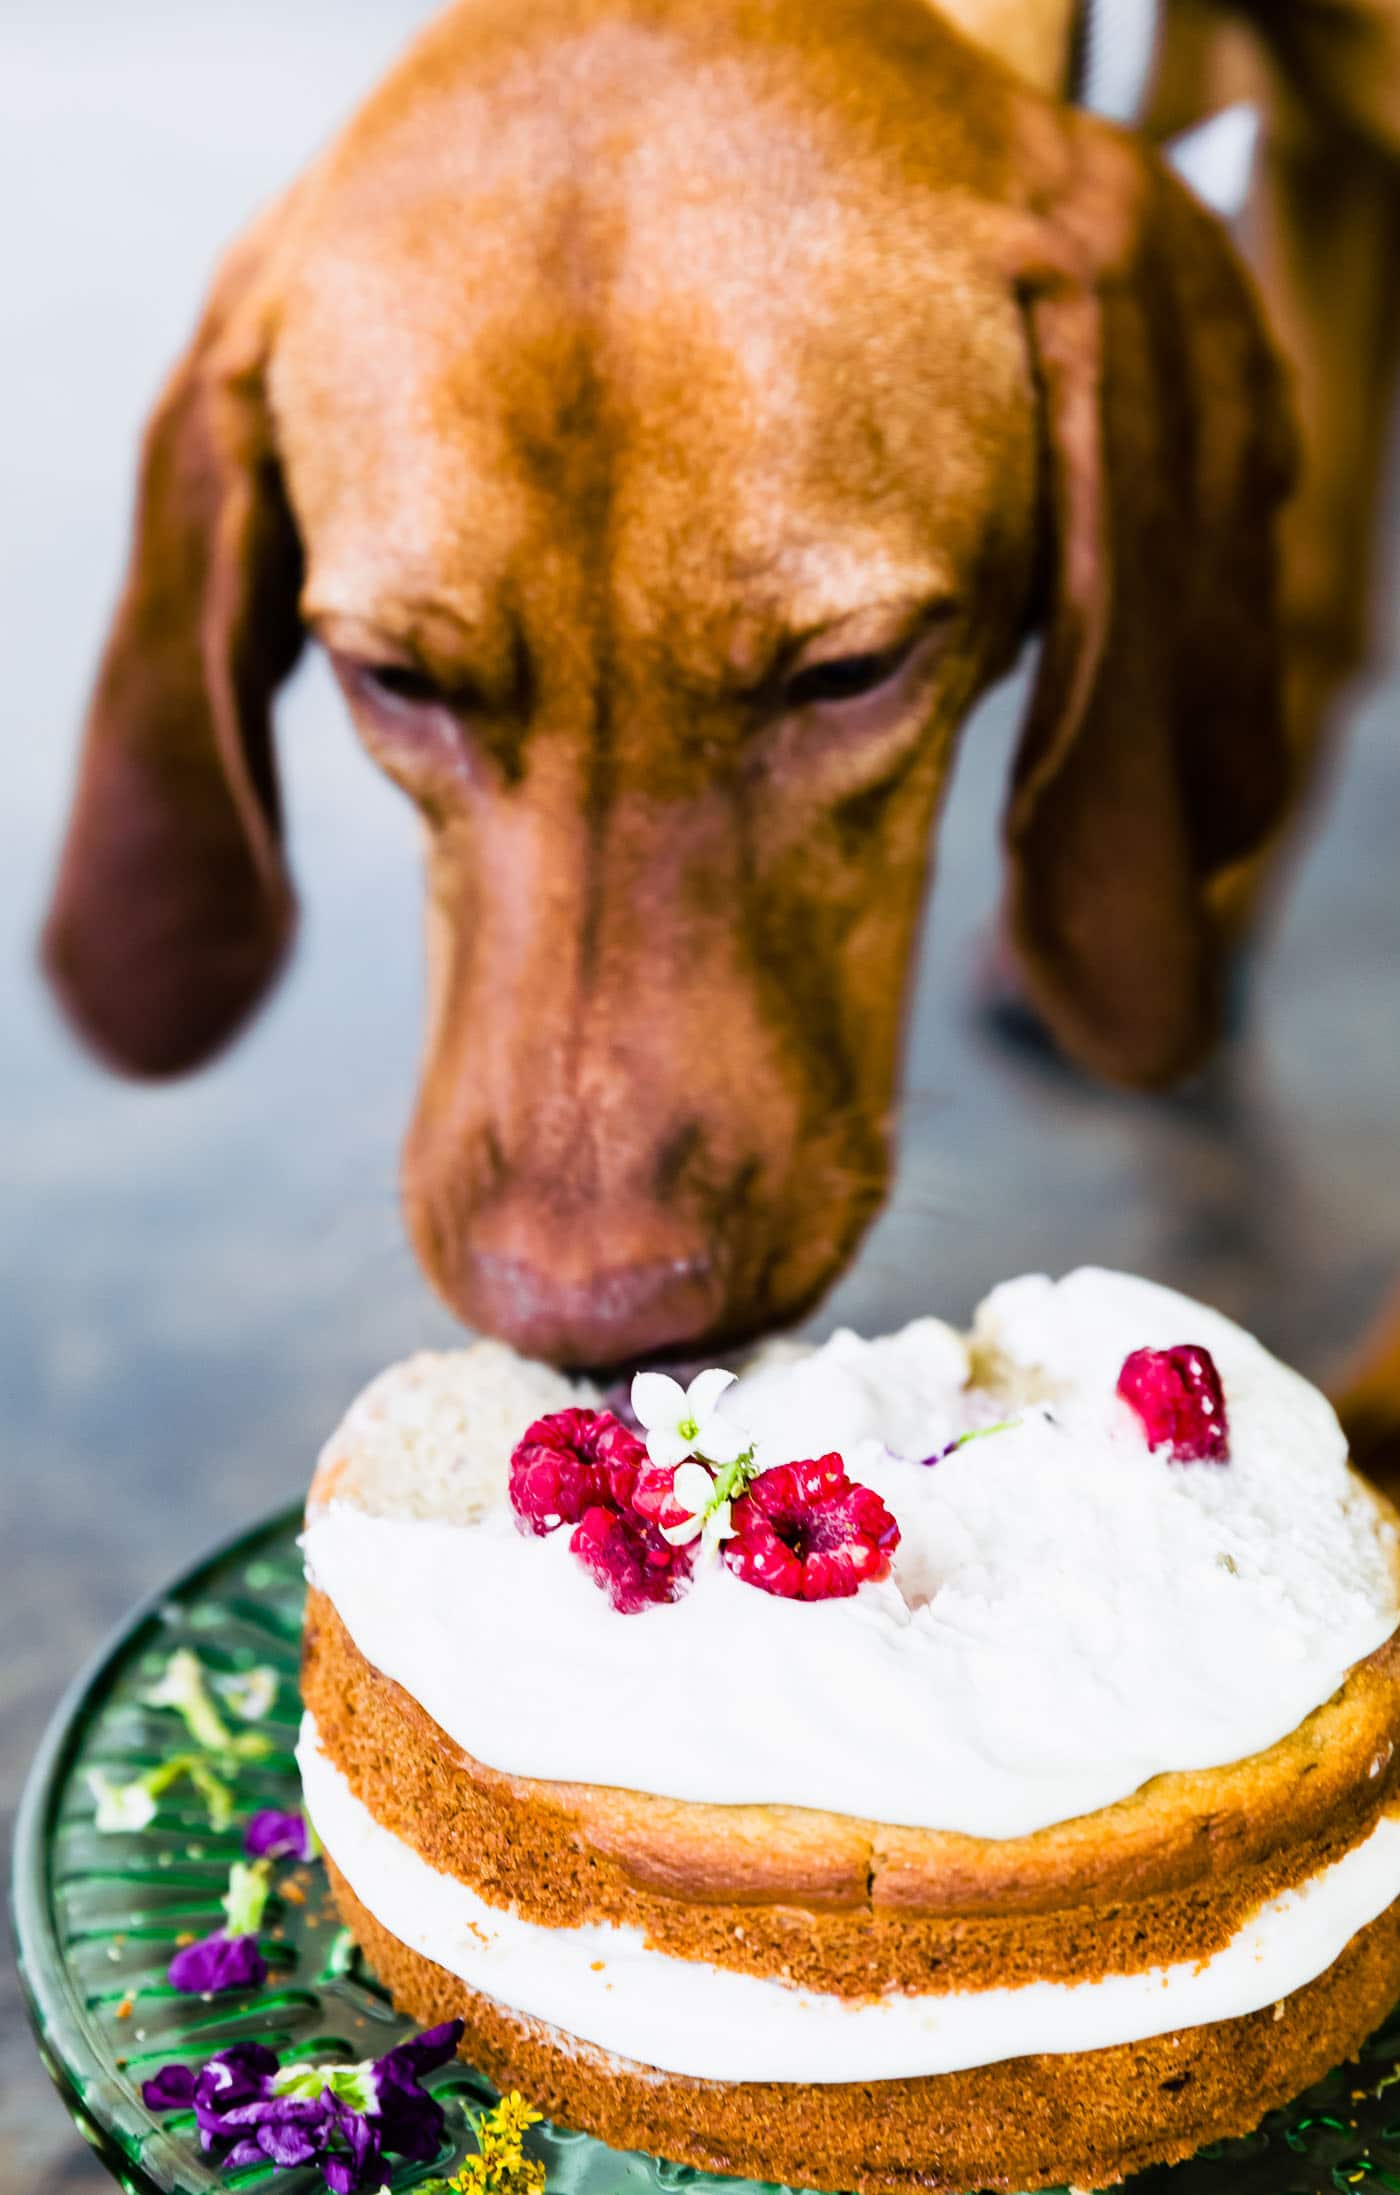 A dog eating an iced birthday cake for dogs.